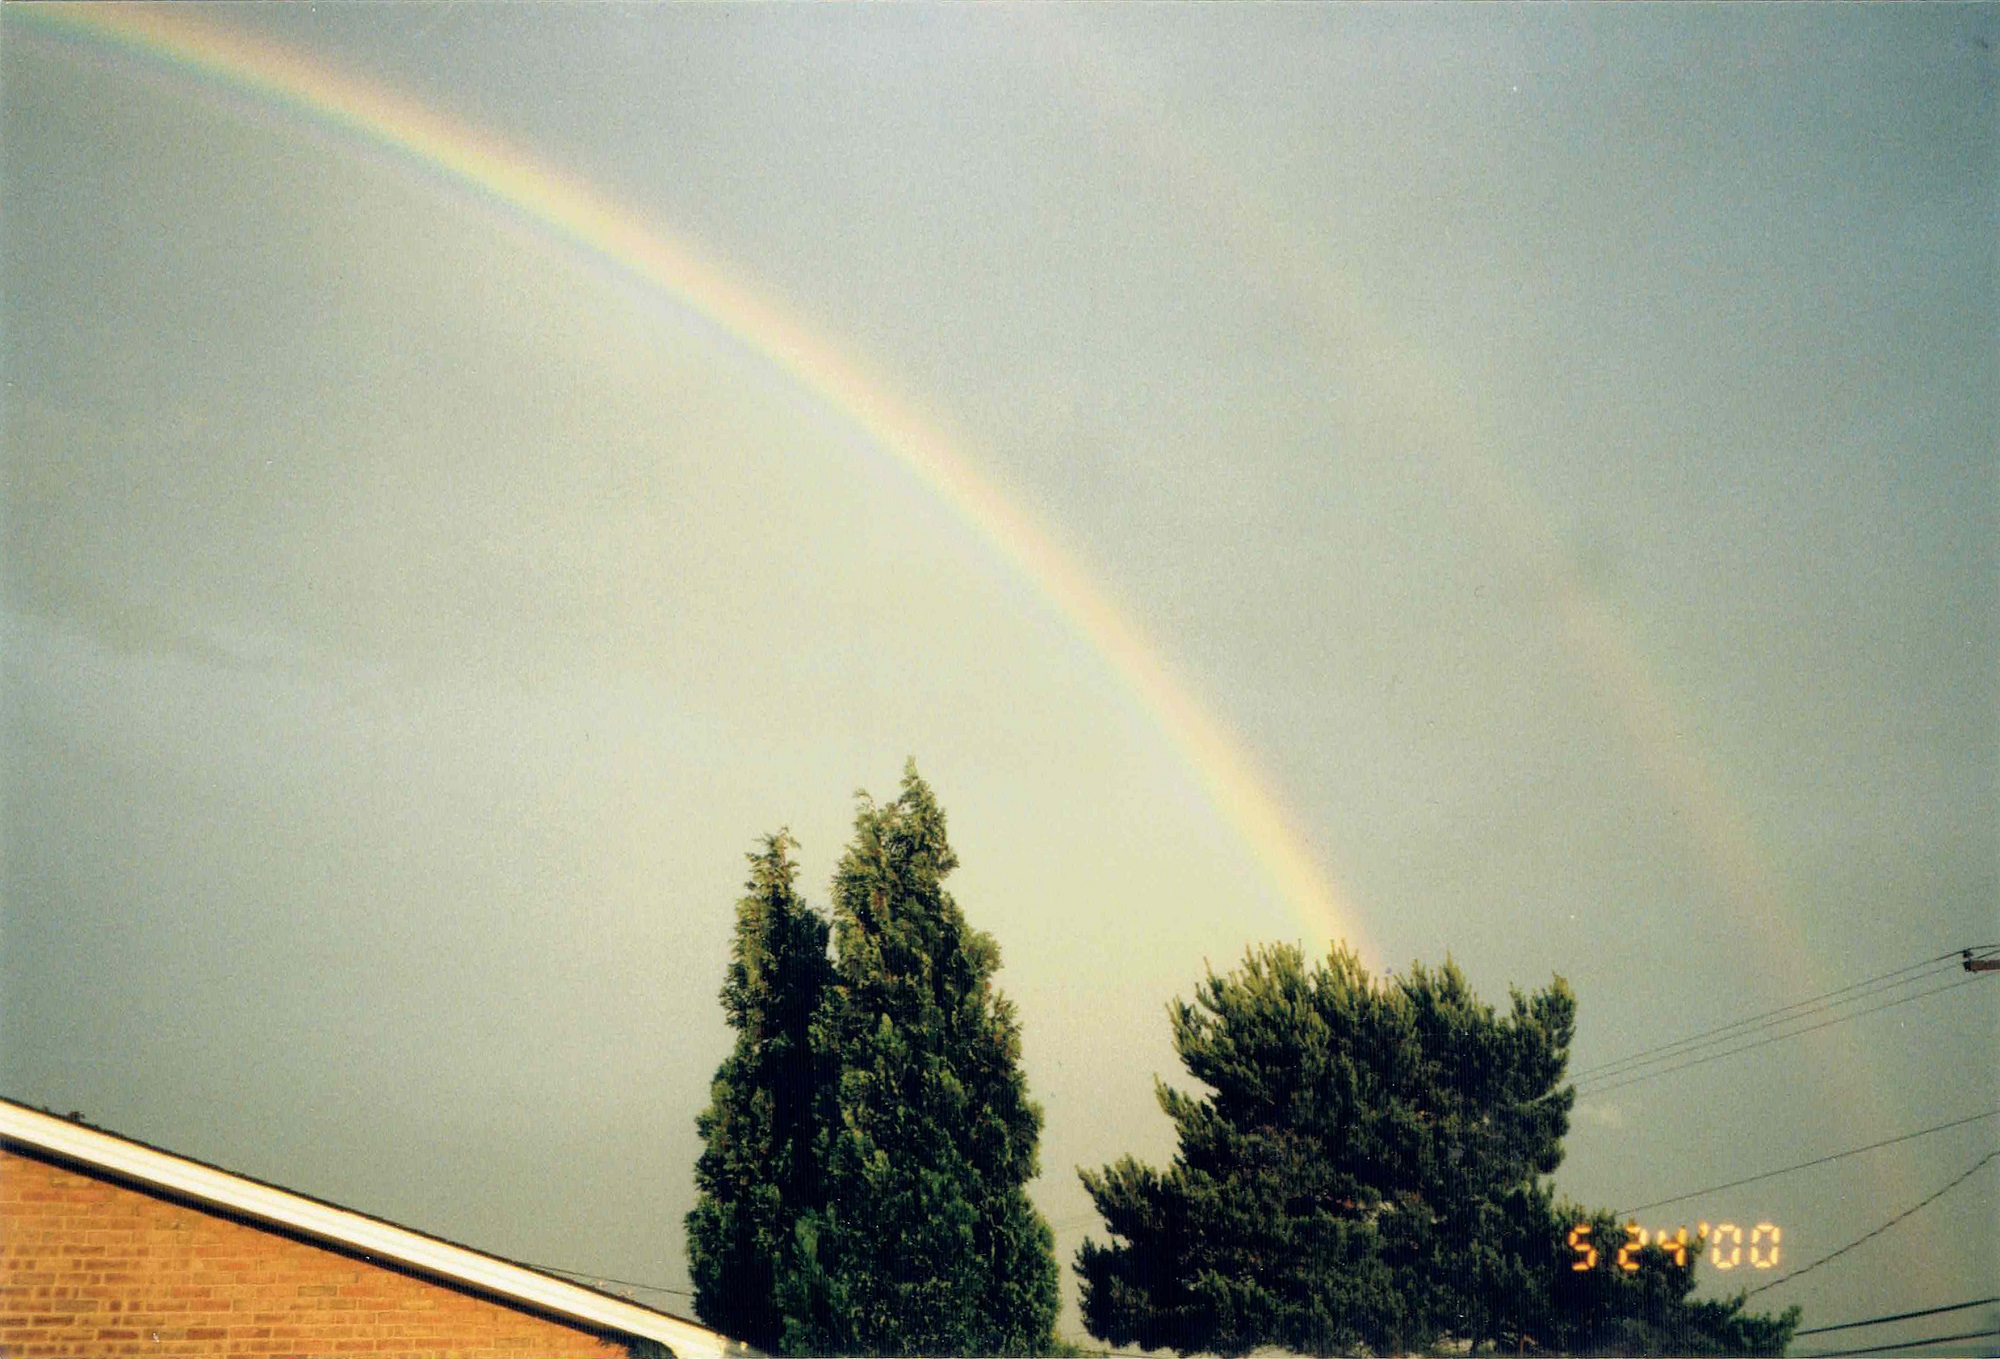 A double rainbow in the sky. There are some trees and the roof of a house below them.